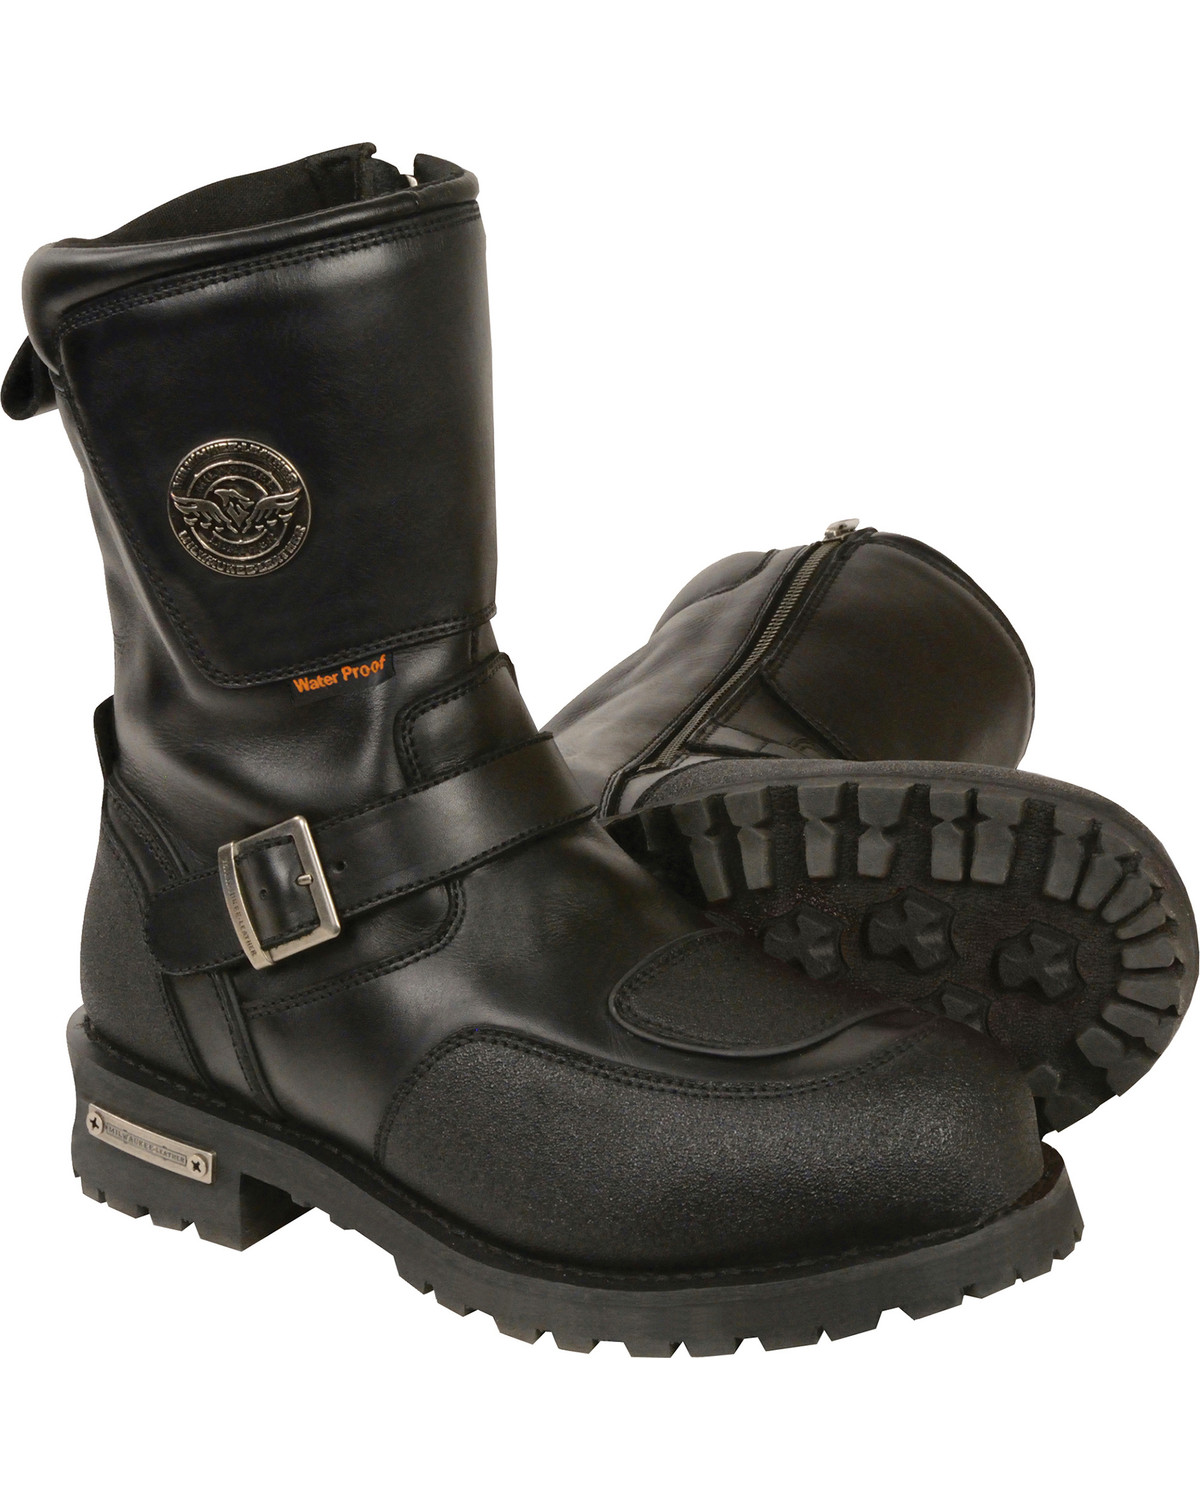 Milwaukee Leather Men's 9" Waterproof Gear Shirt Protection Boots - Round Toe